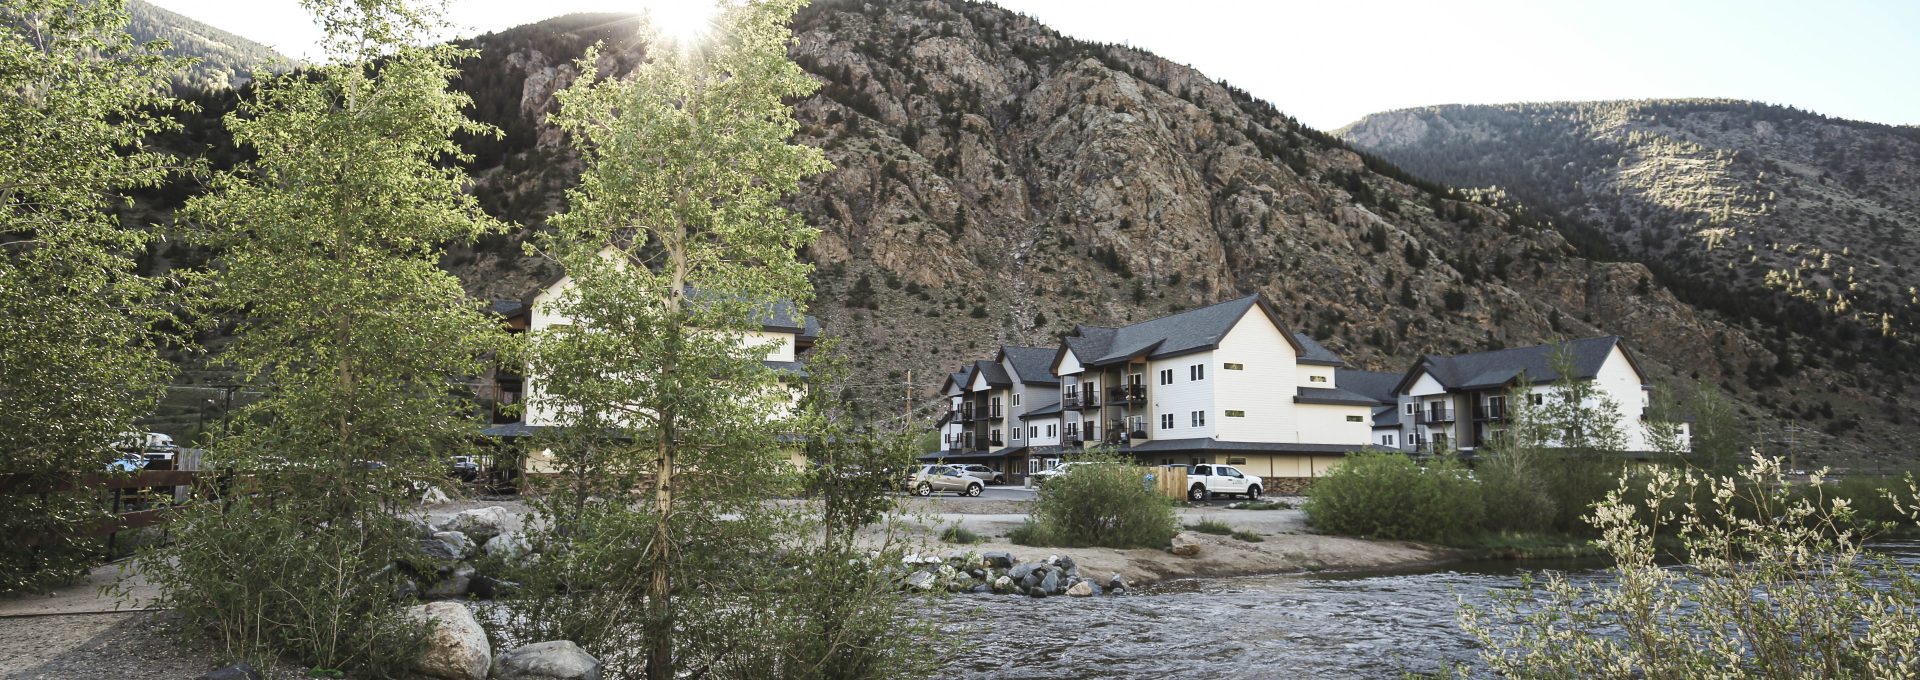 a river runs through a mountain town with houses at The Bighorn Crossing